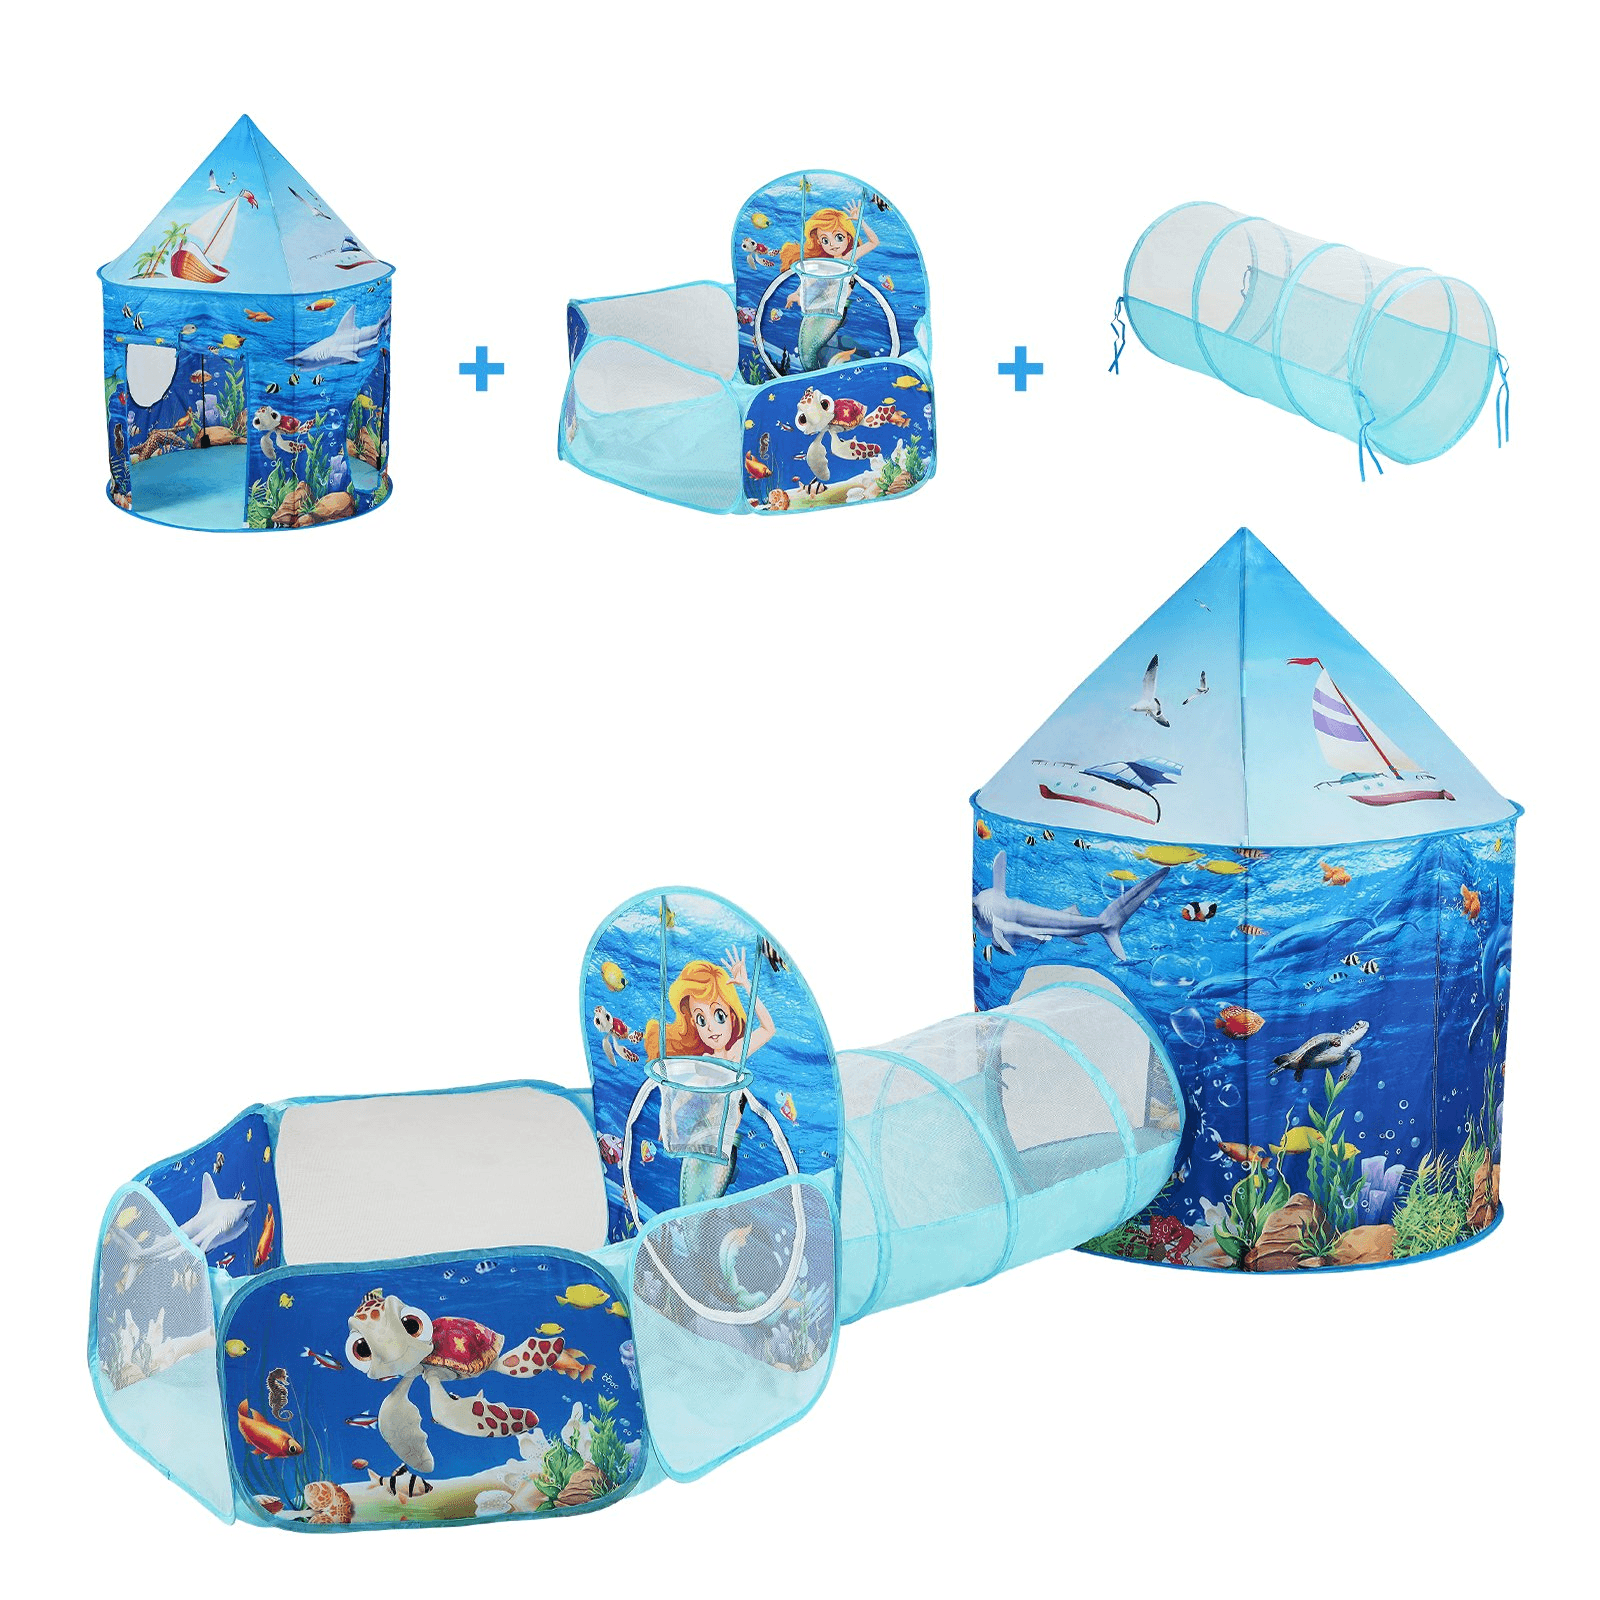 VEVOR 3 in 1 Kids Play Tent with Tunnel, Basketball Hoop for Boys, Girls, Babies and Toddlers, Indoor/Outdoor Pop Up Playhouse with Carrying Bag & Banding Straps Birthday Gifts, Blue Ocean - Loomini